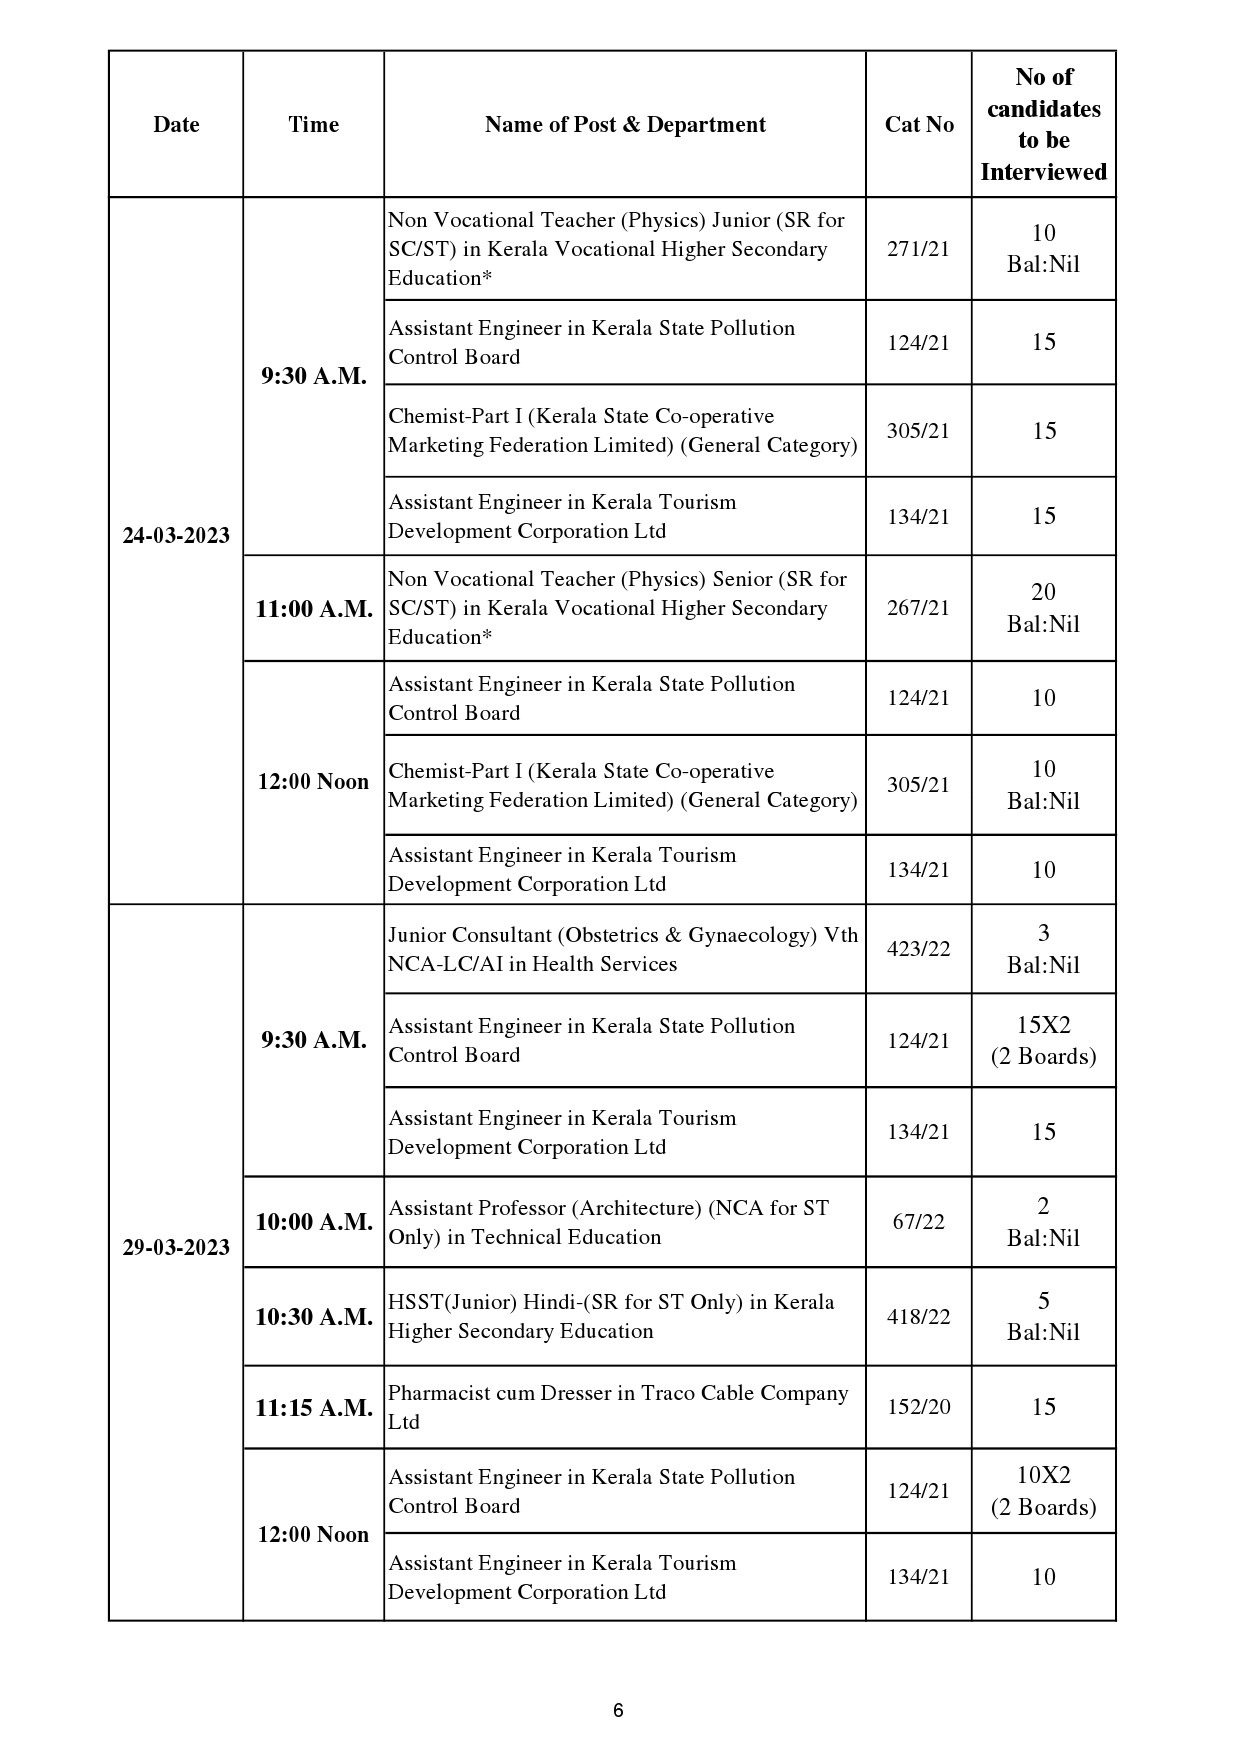 Interview Programme For The Month Of March 2023 - Notification Image 6